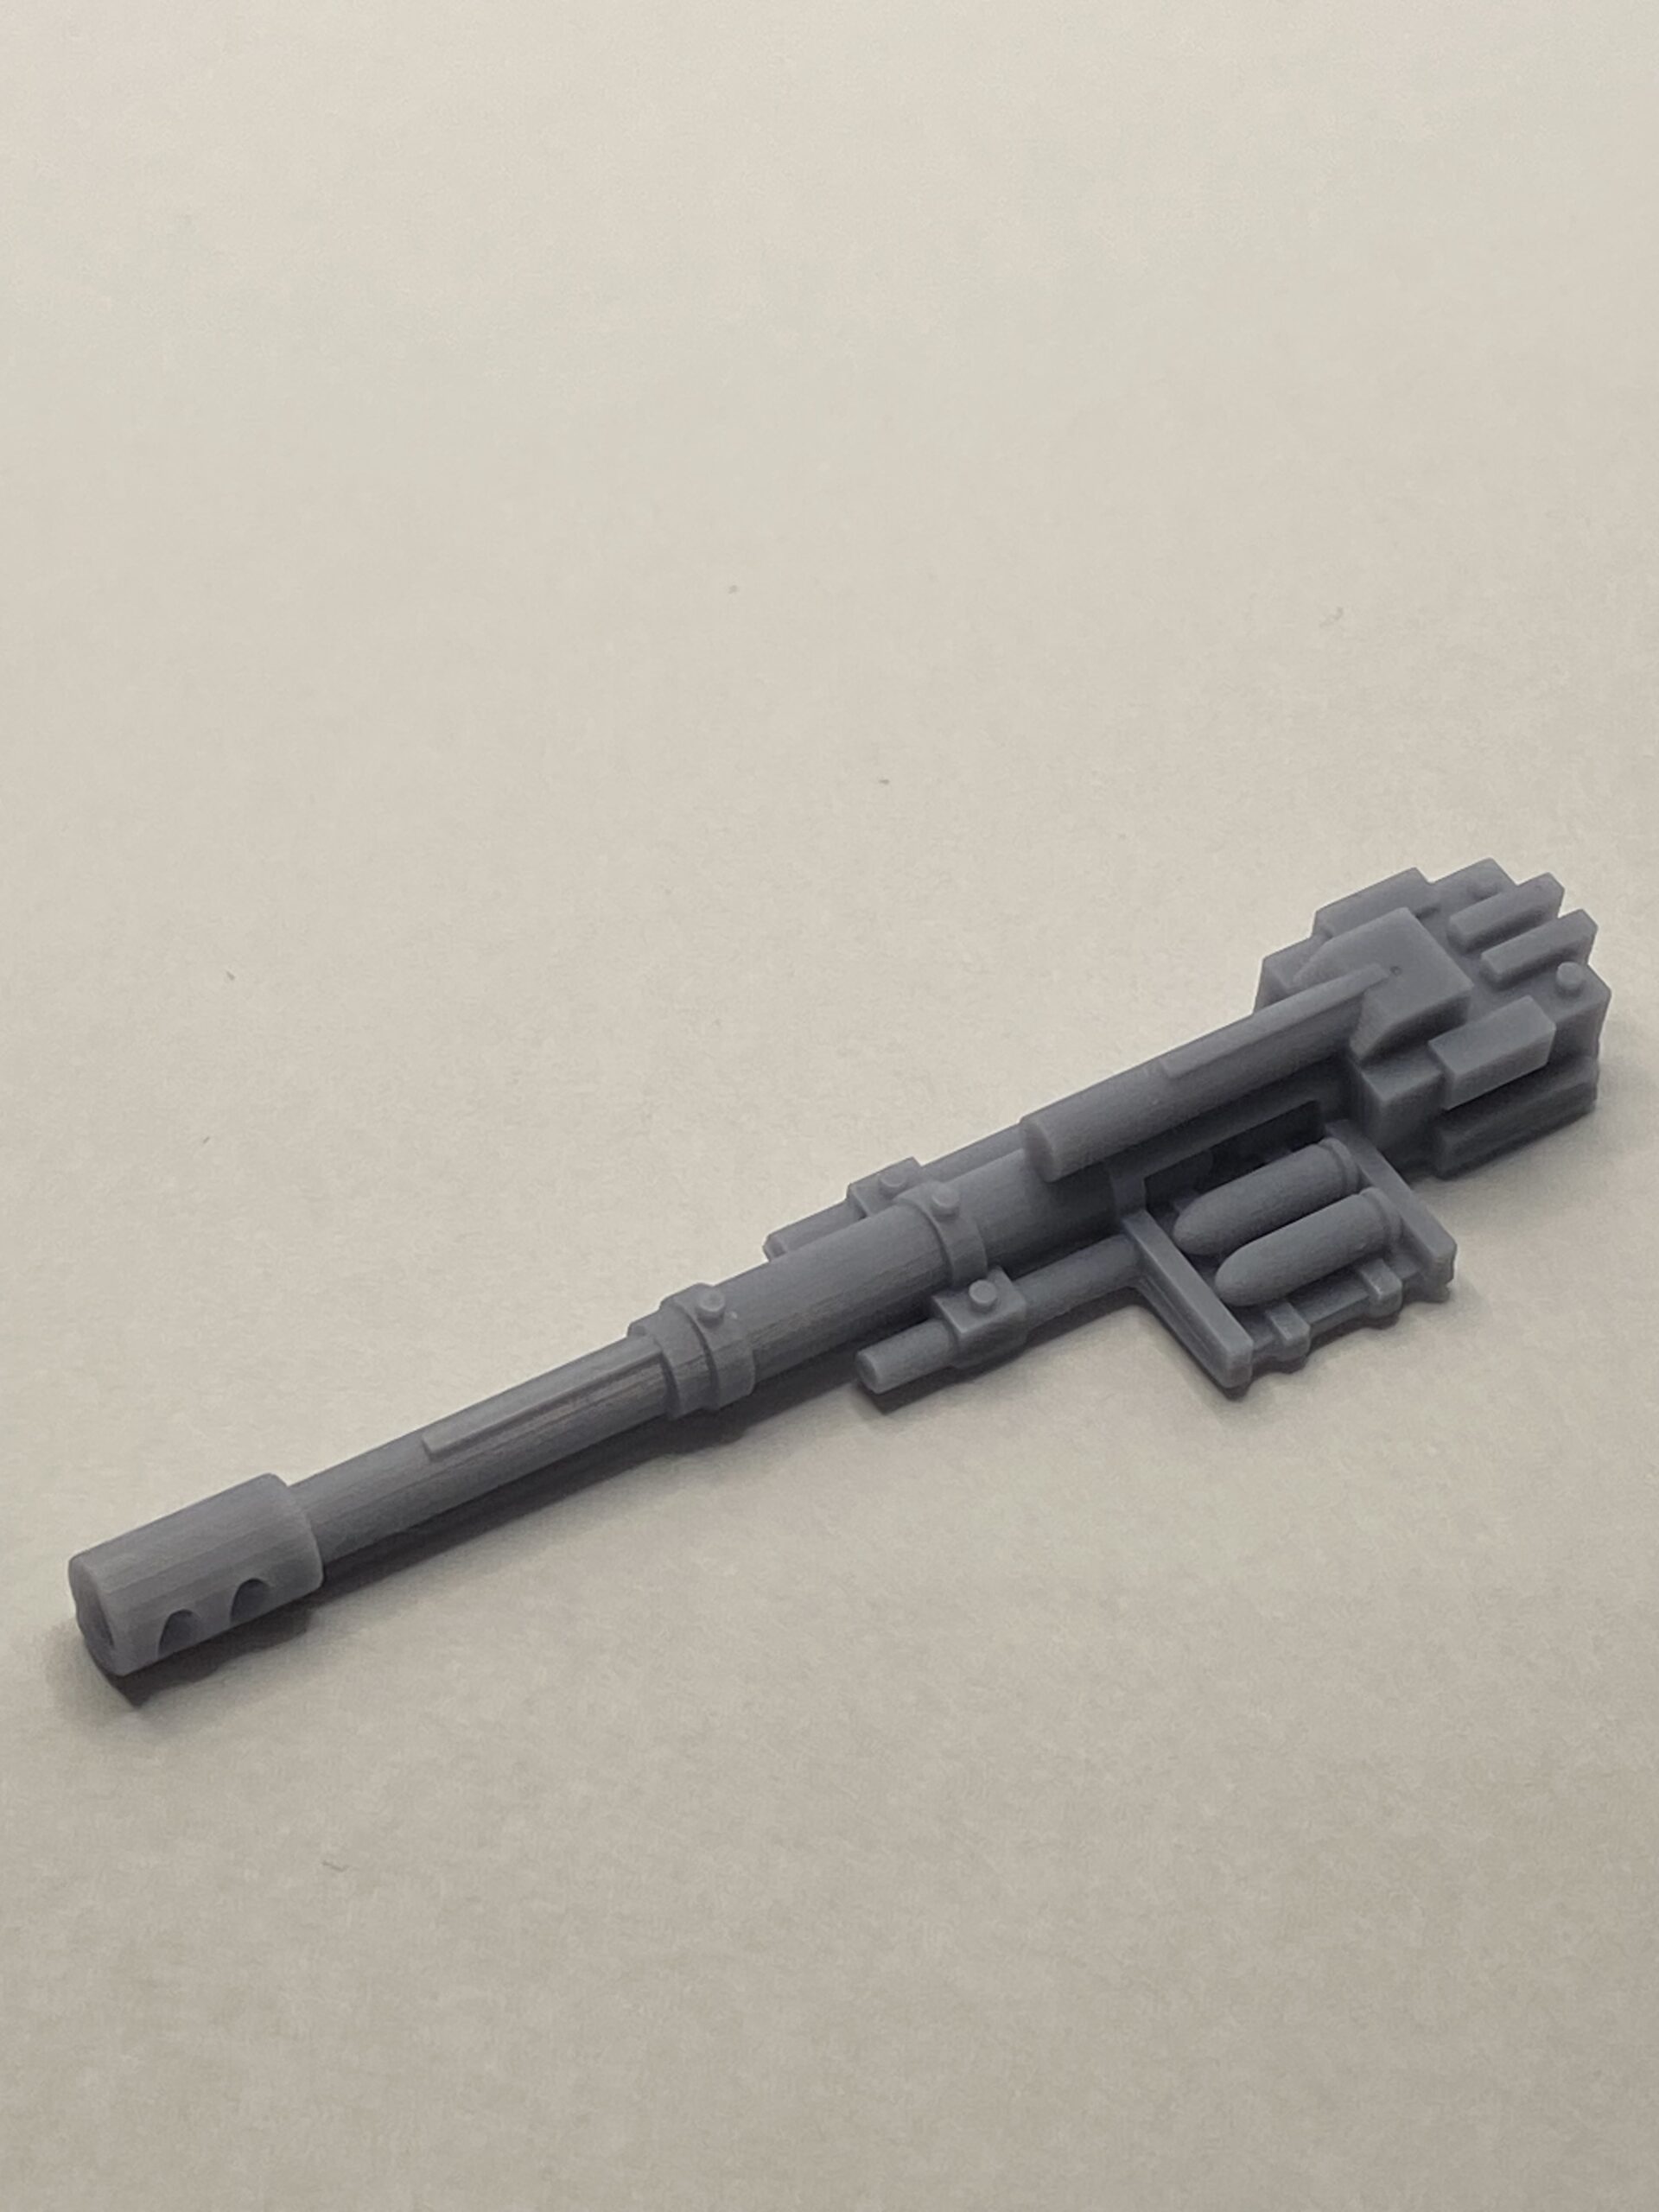 125mm Cannon Weapons Miniature For Gaslands & Tabletop Games